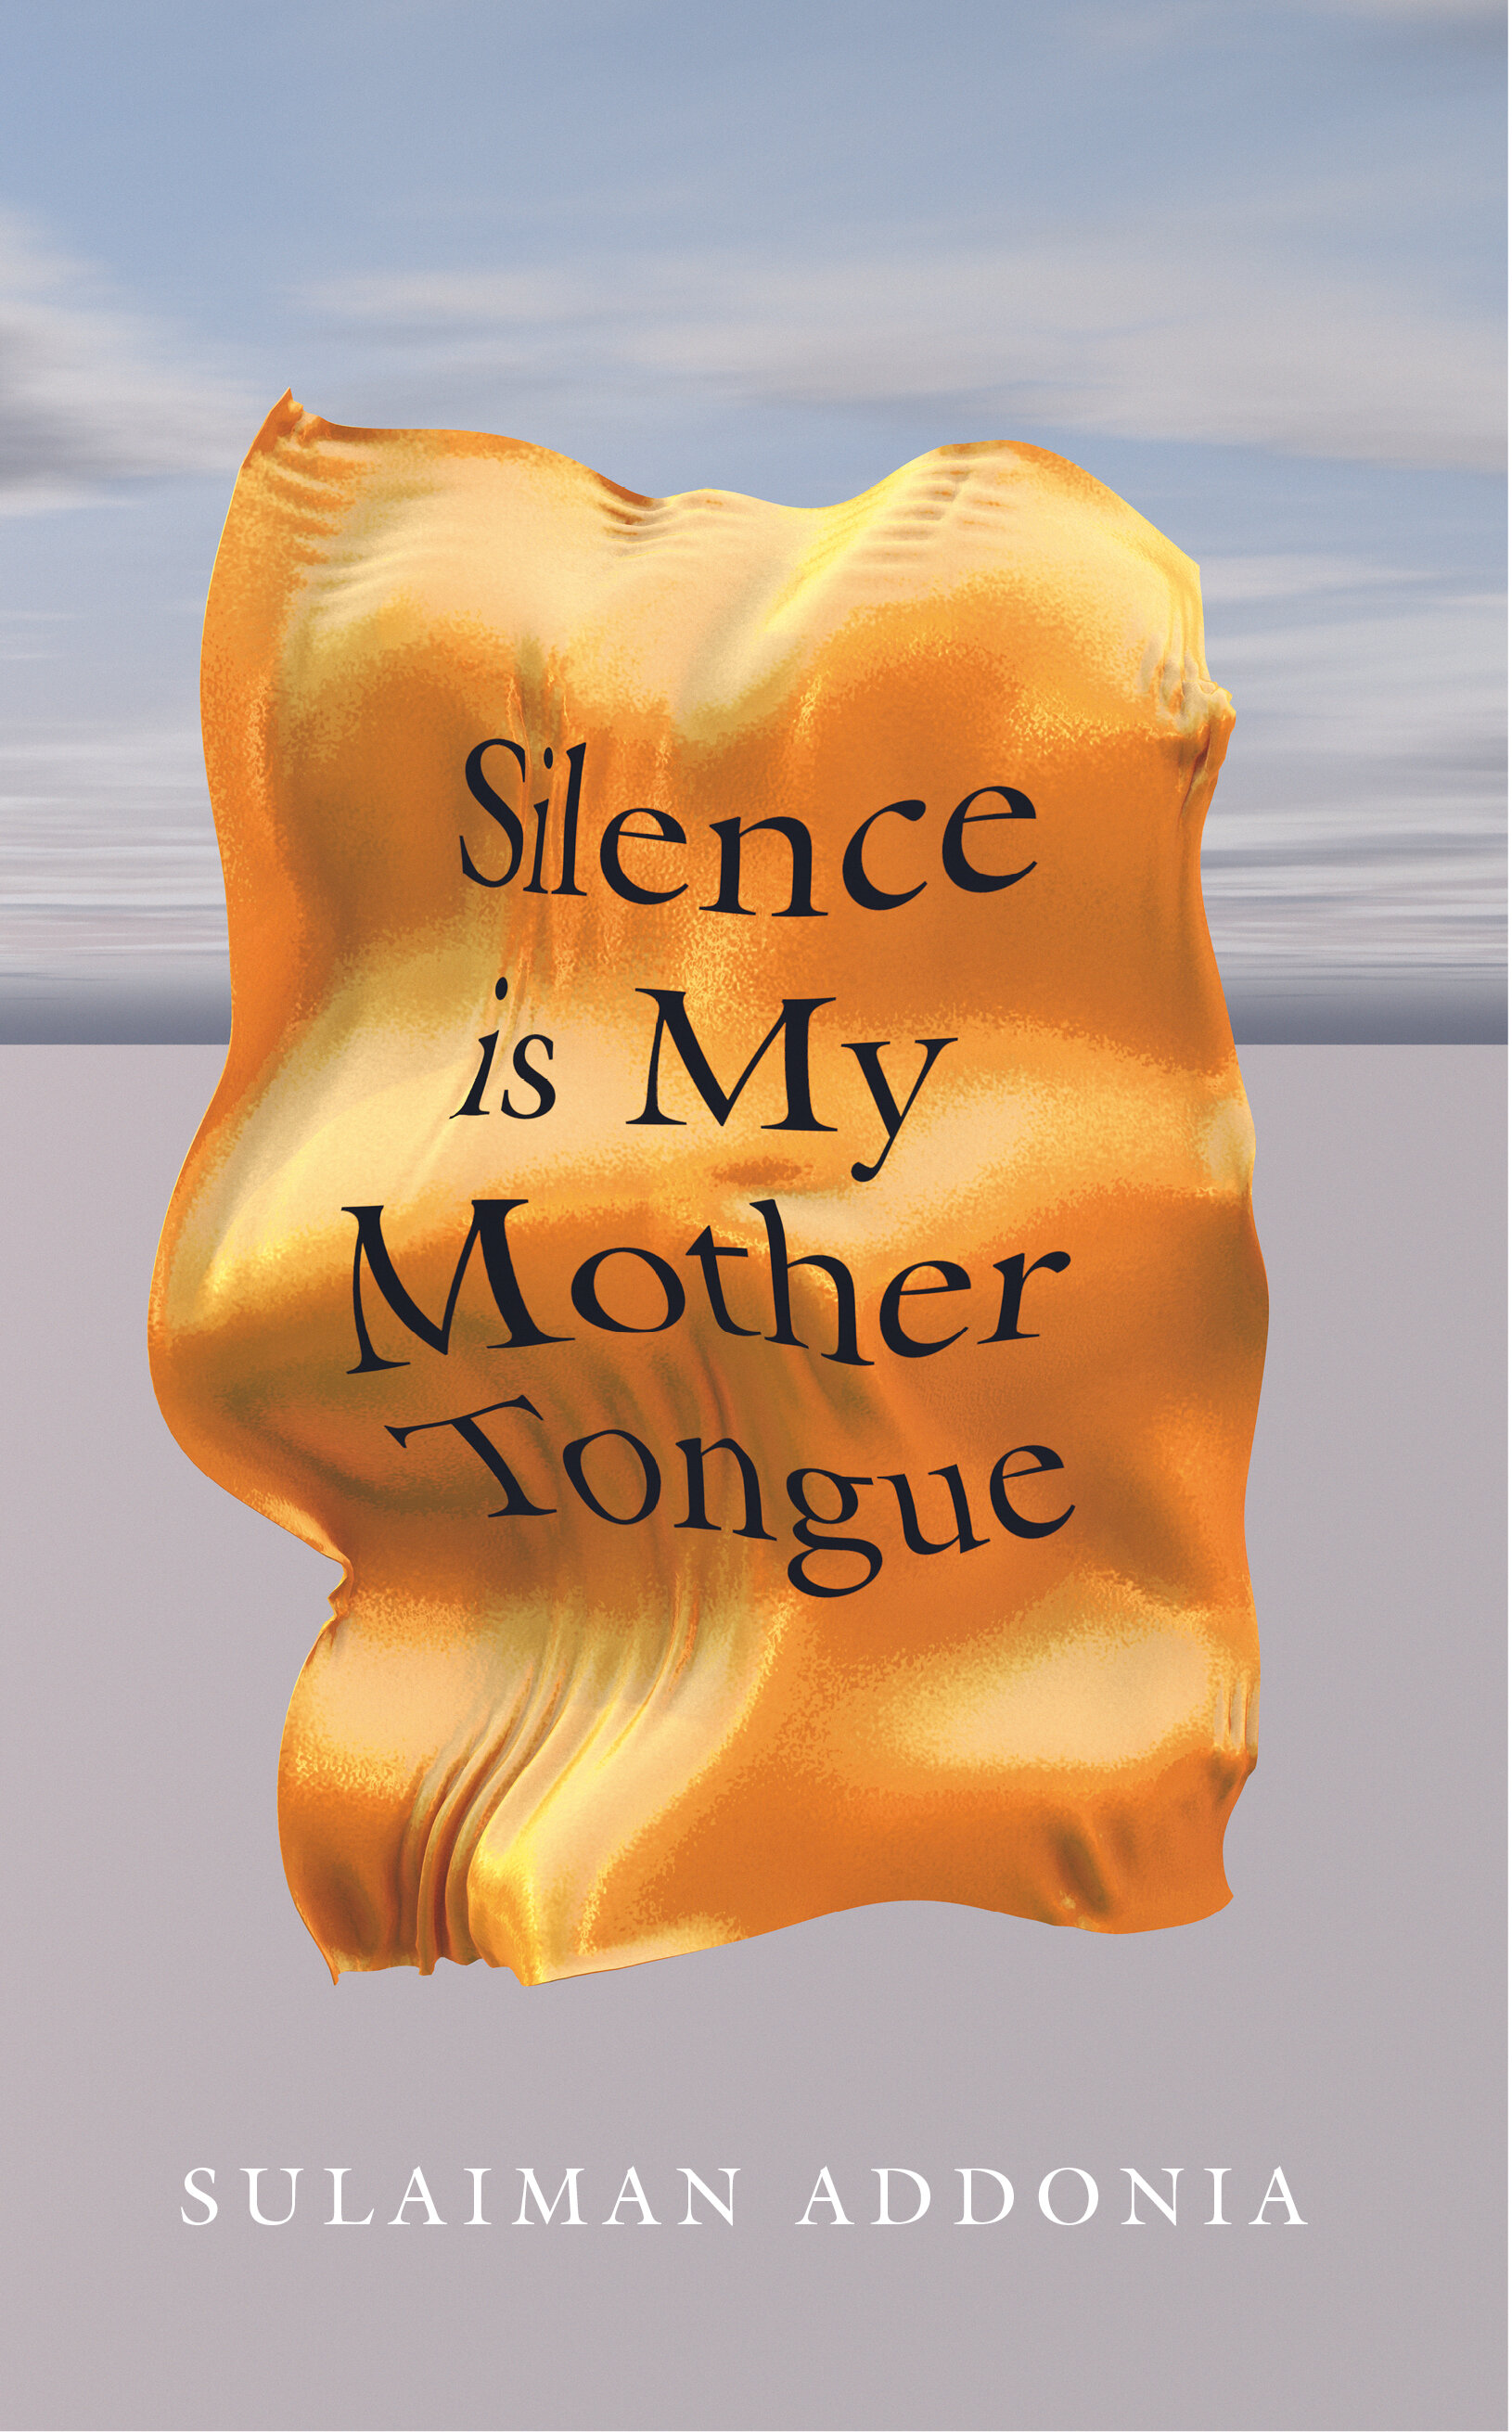 Sulaiman Addonia - Silence is My Mother Tongue